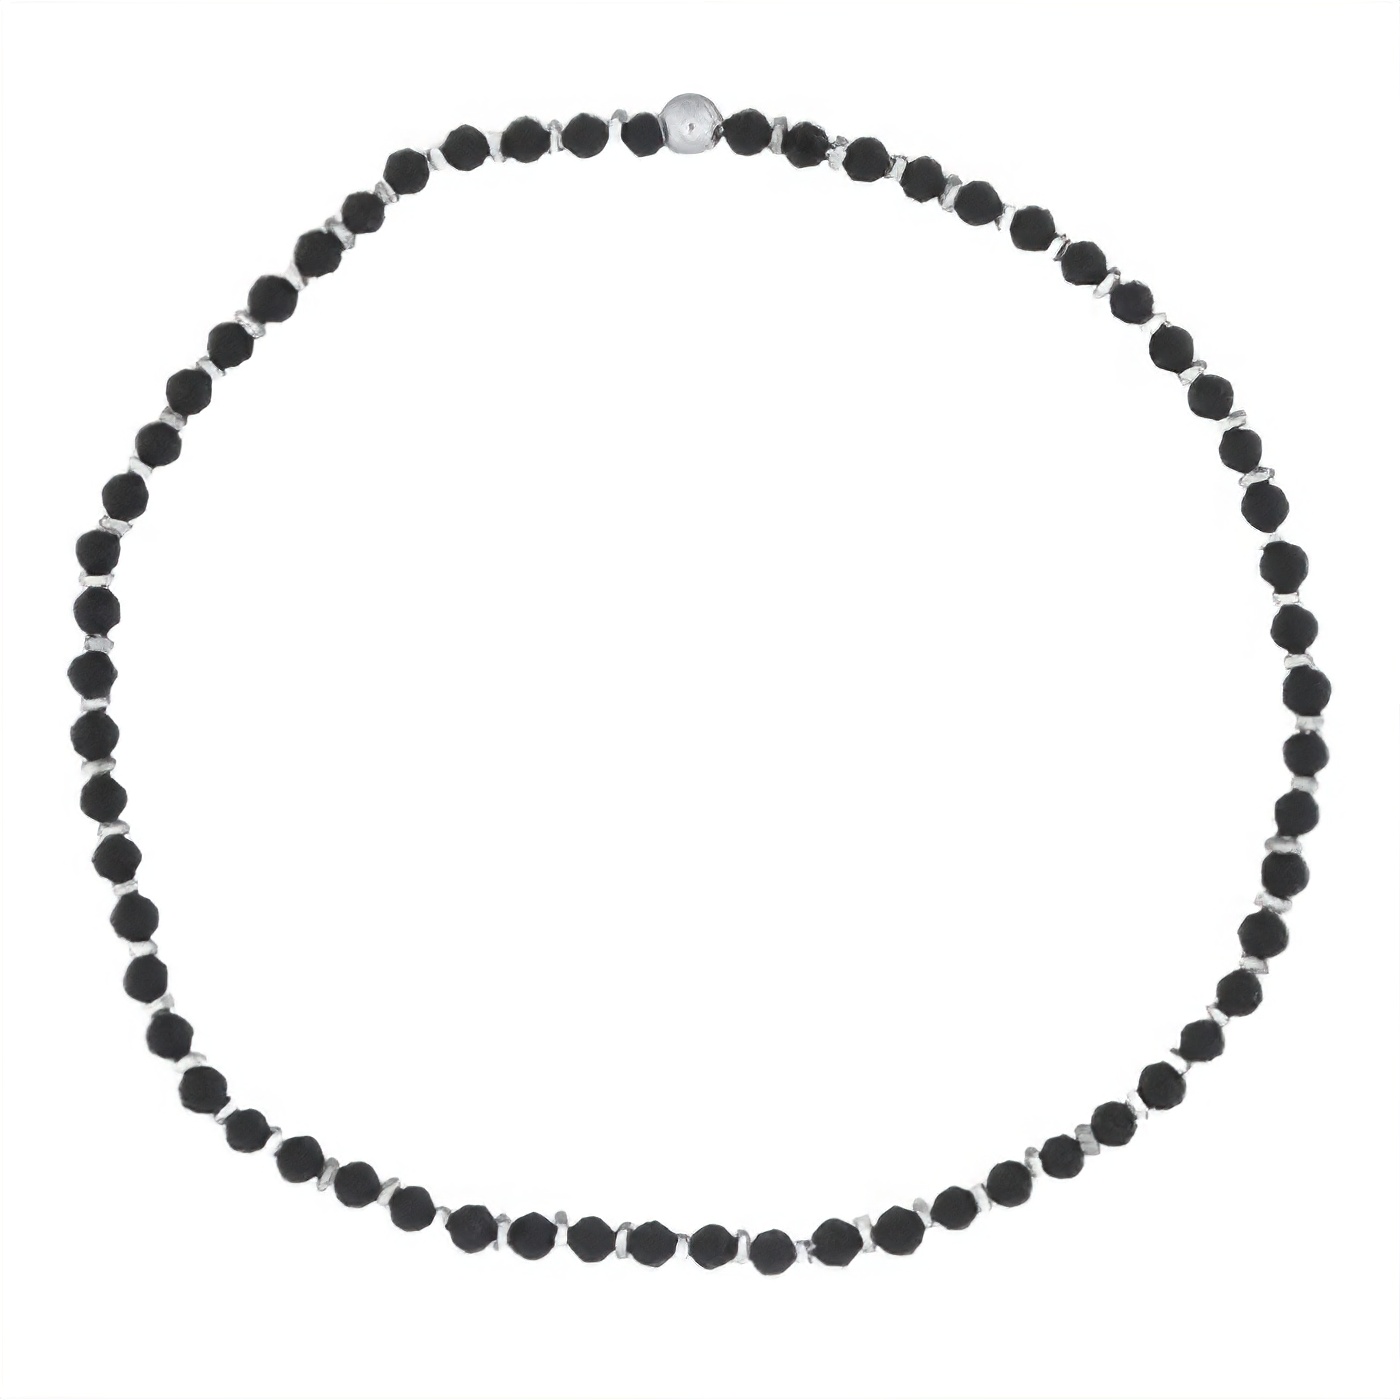 Stretchable Black Agate Bracelet With 925 Silver Spacer by BeYindi 